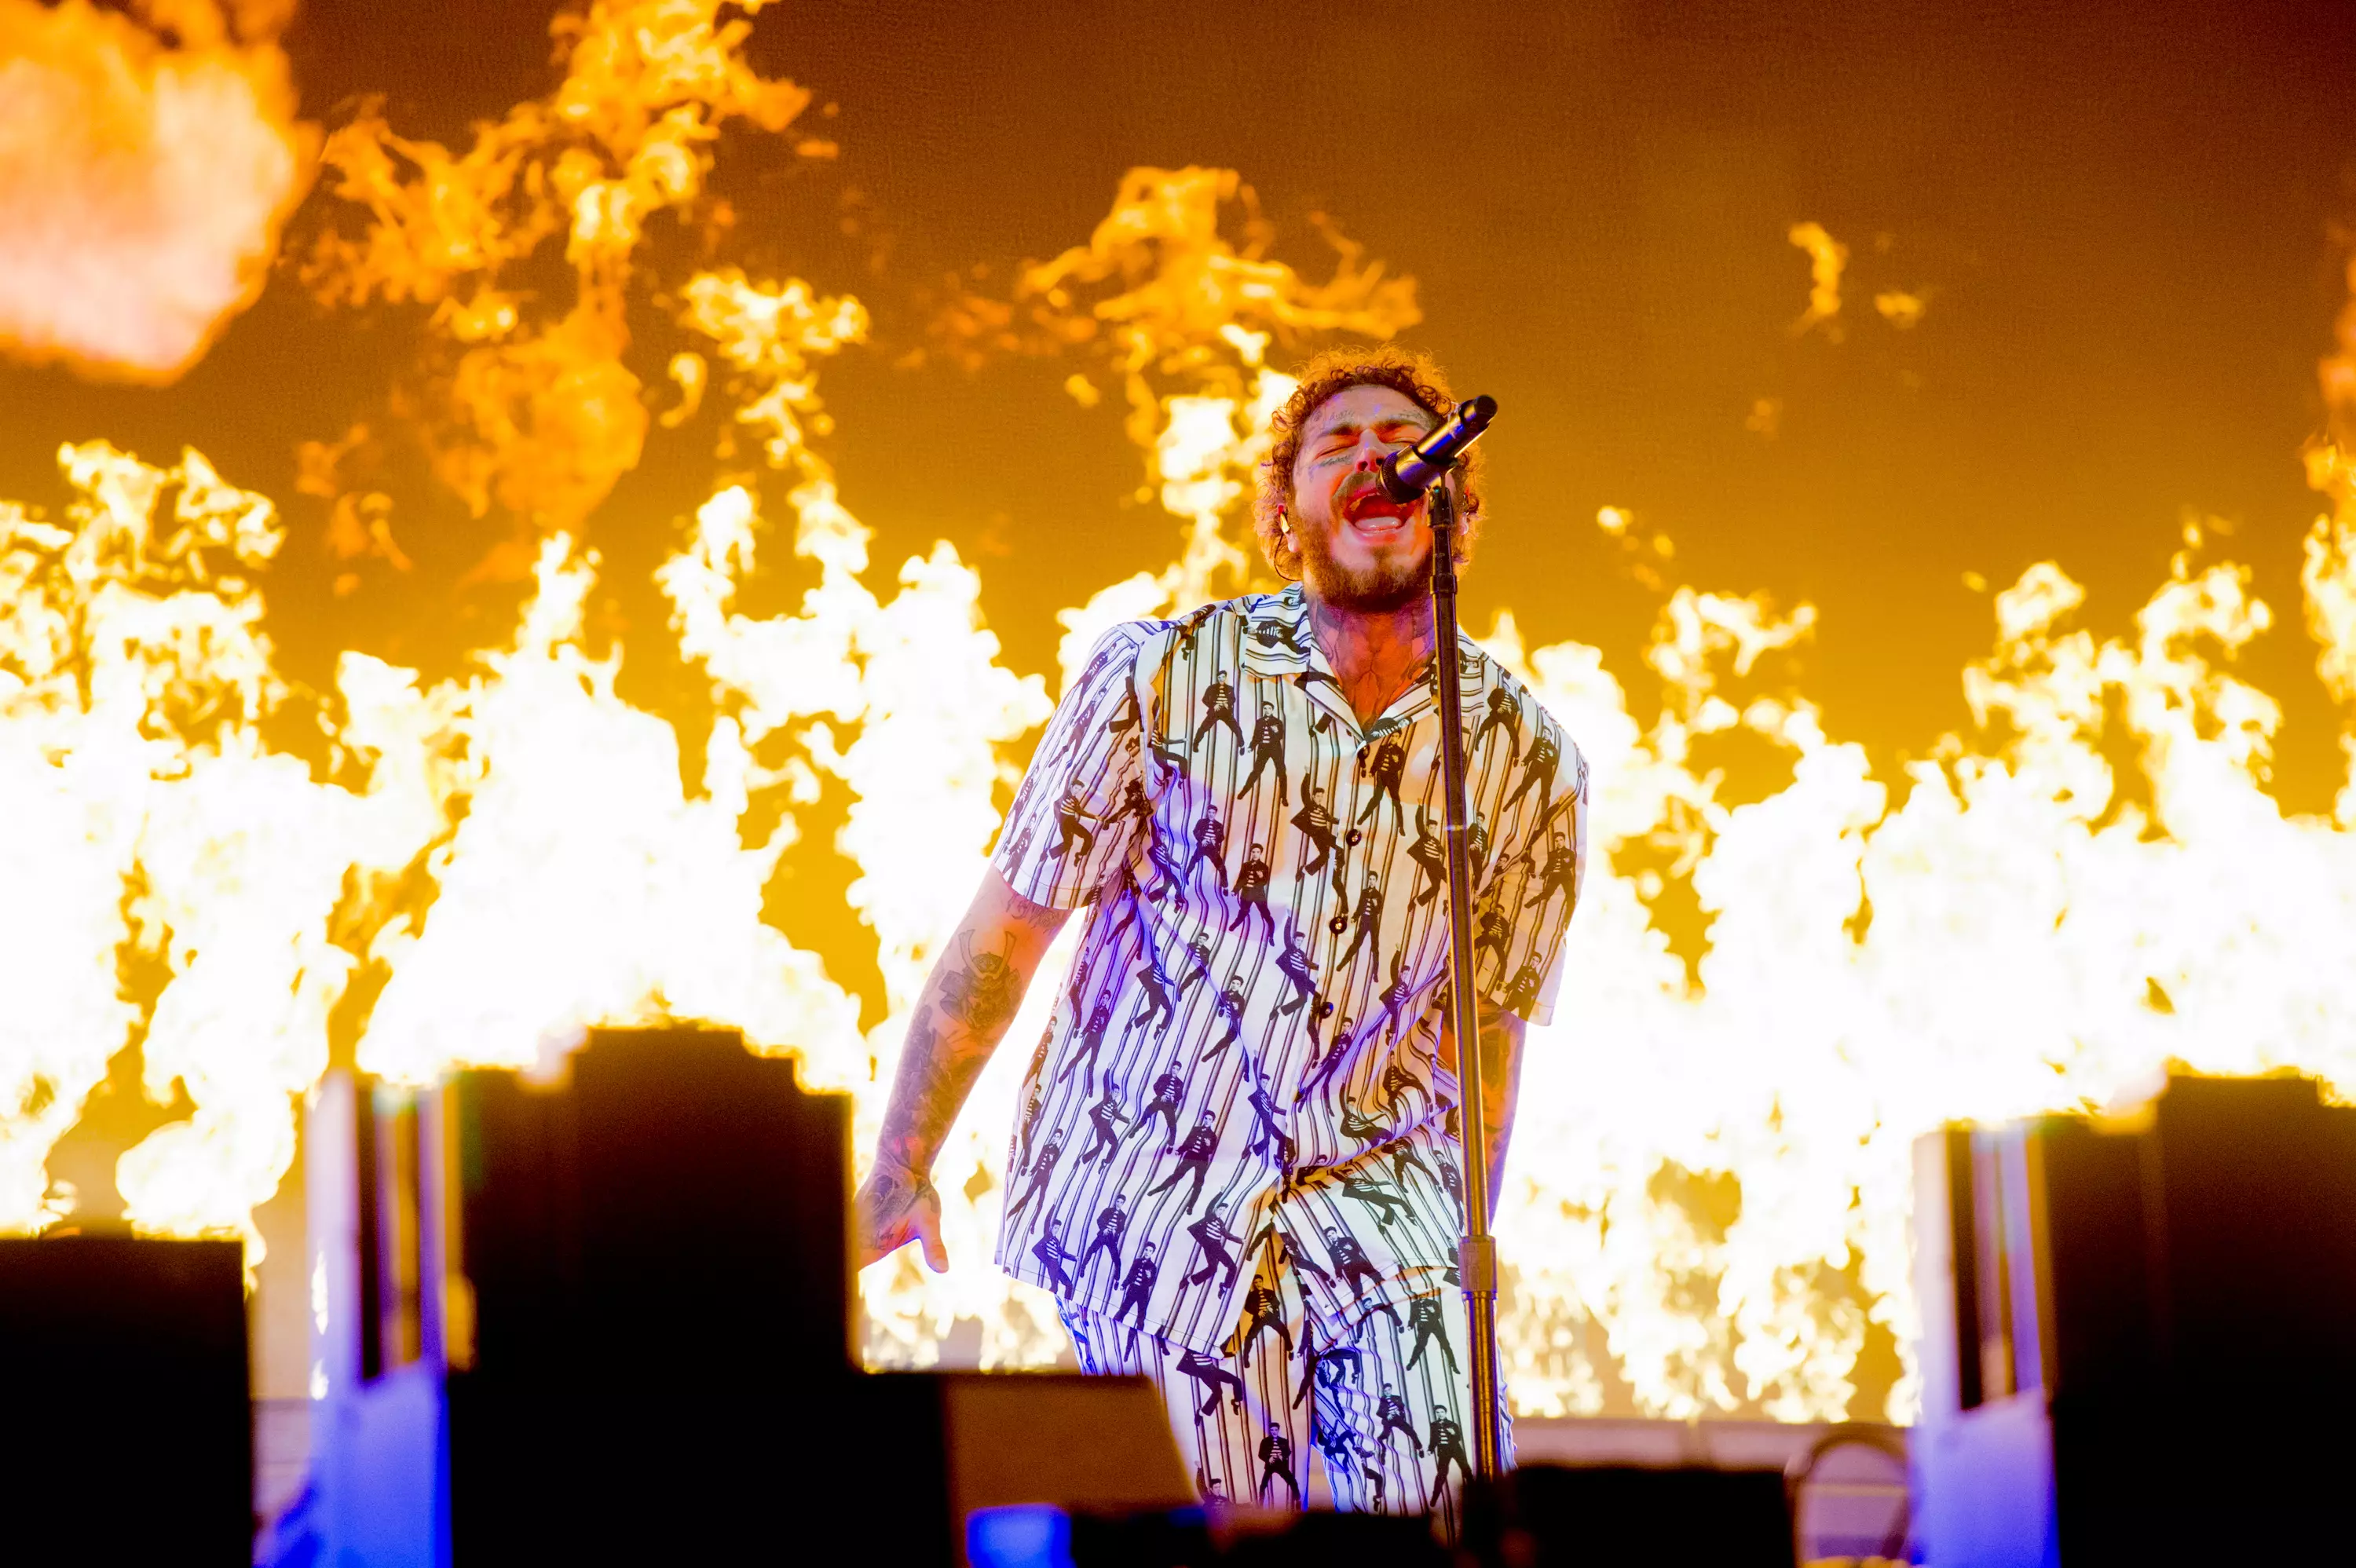 Post Malone performing at Leeds Festival this year.